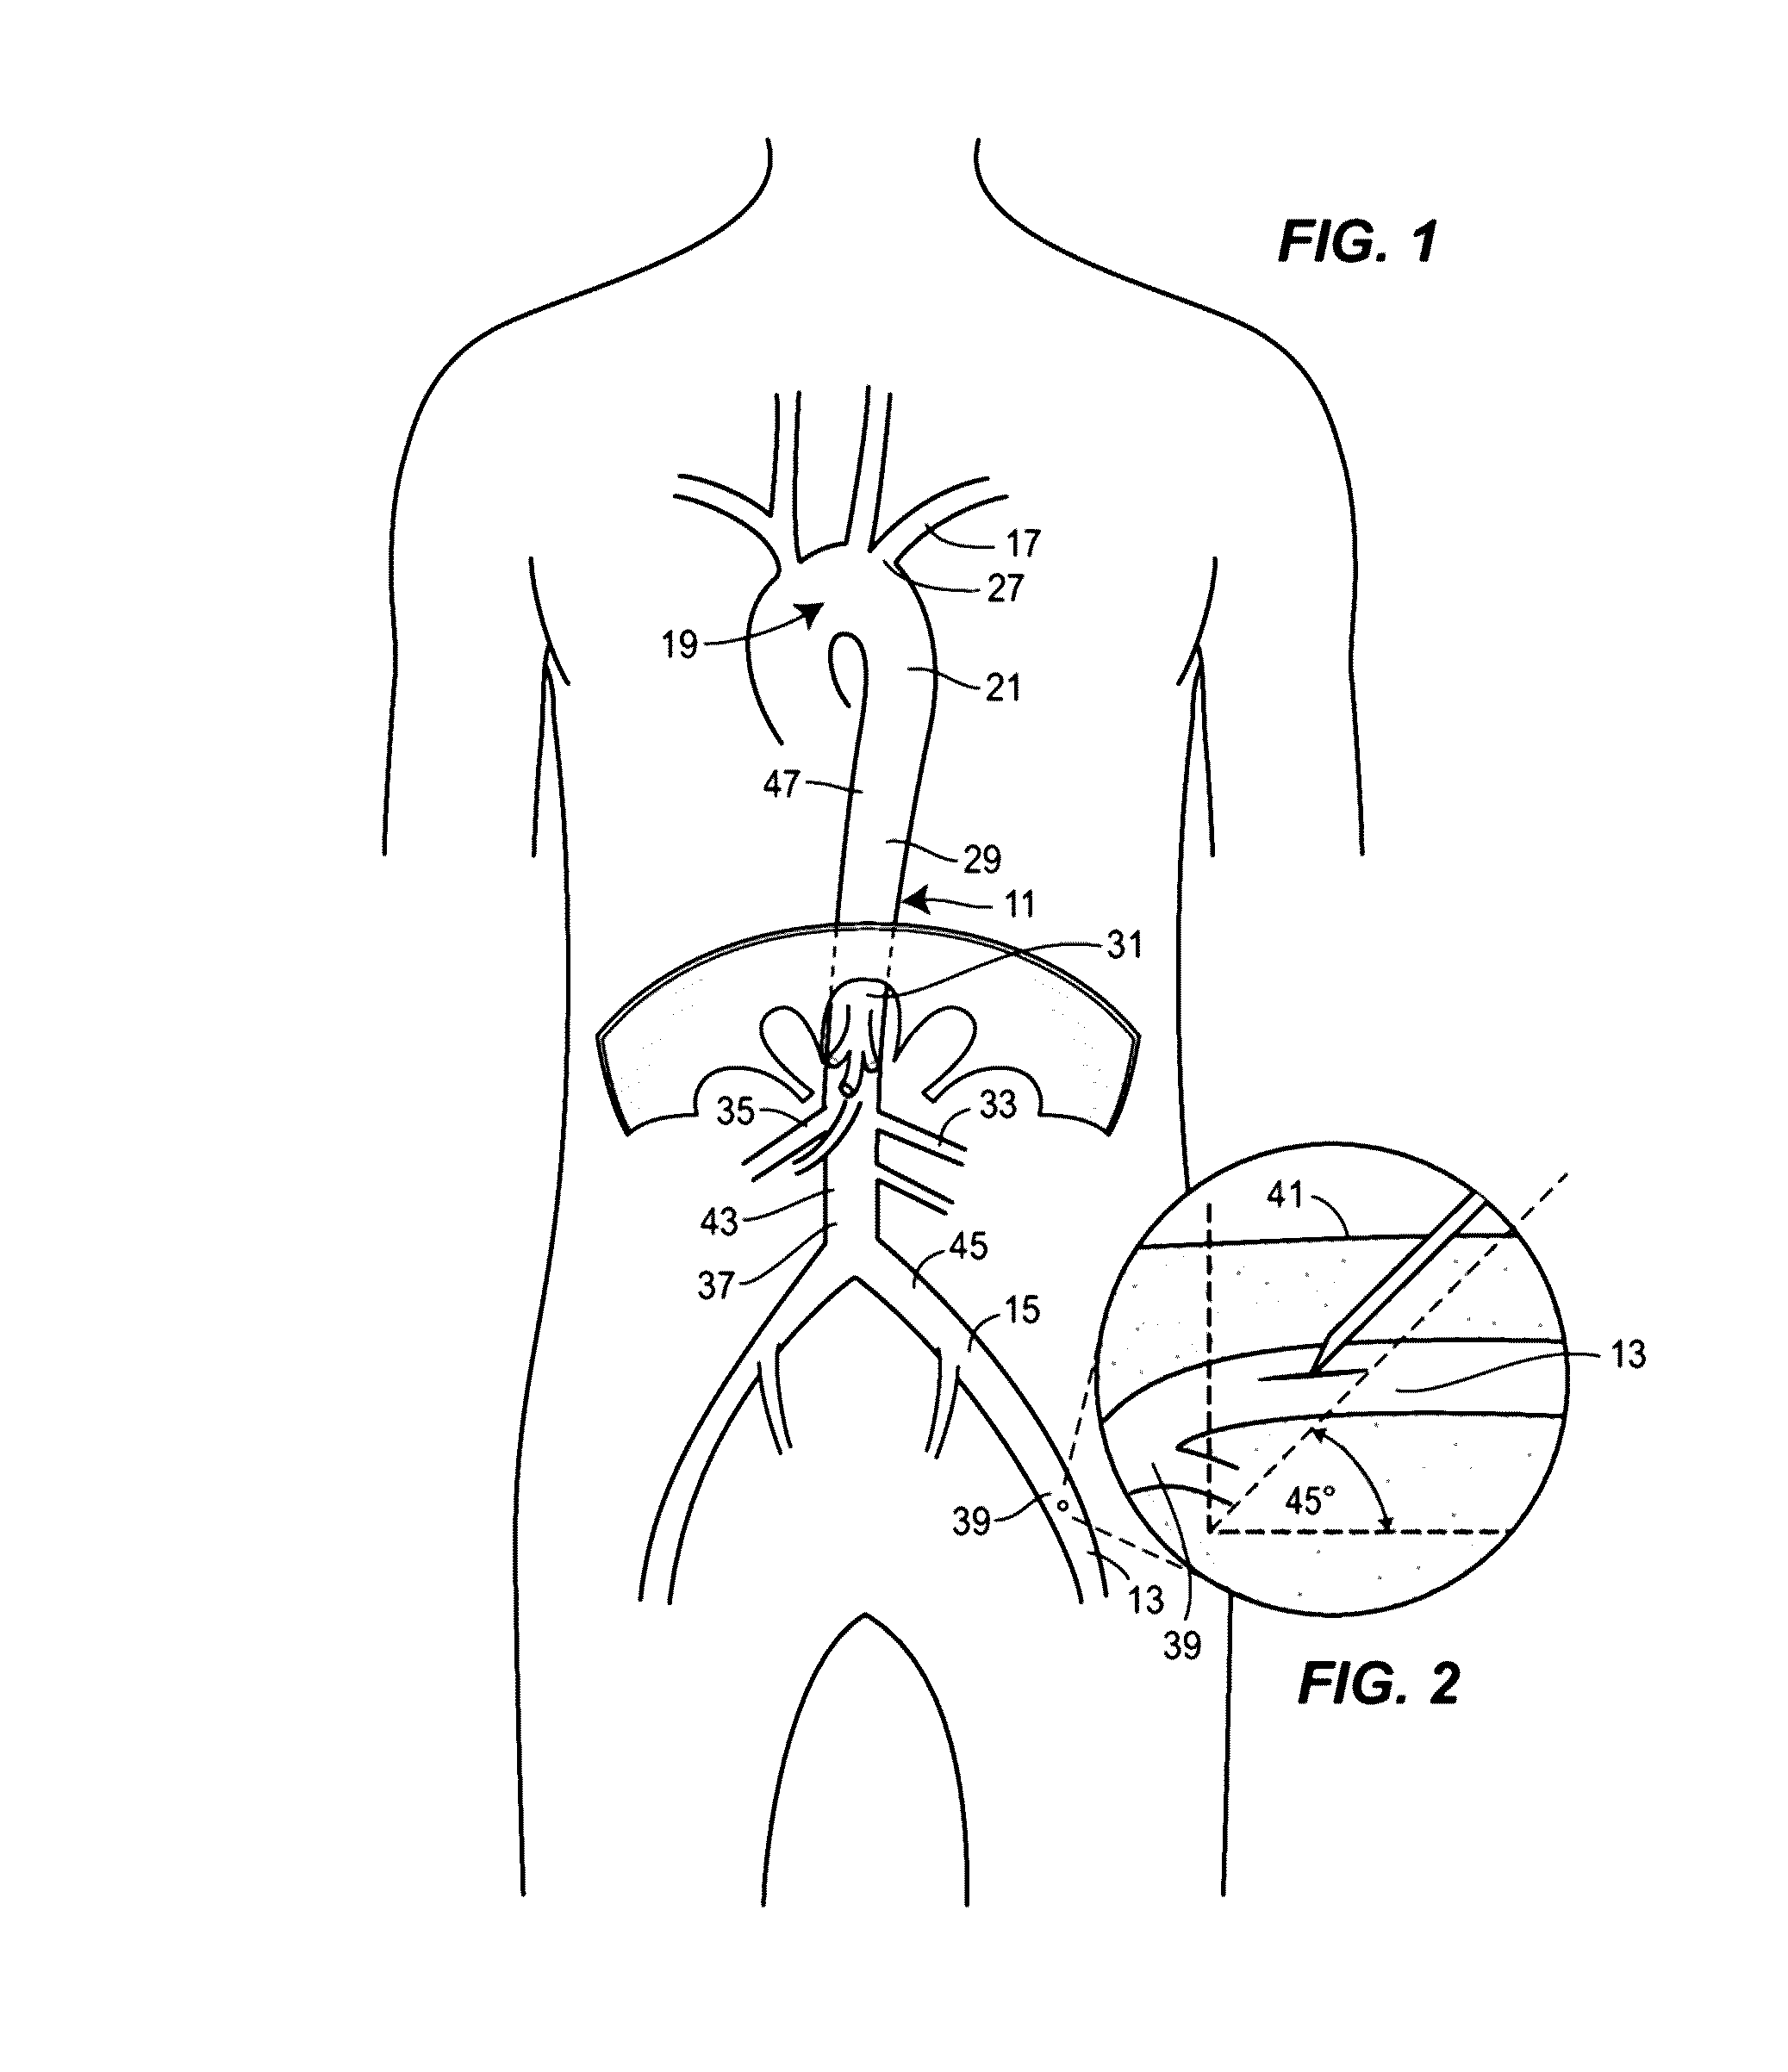 Fluoroscopy-independent balloon guided occlusion catheter and methods